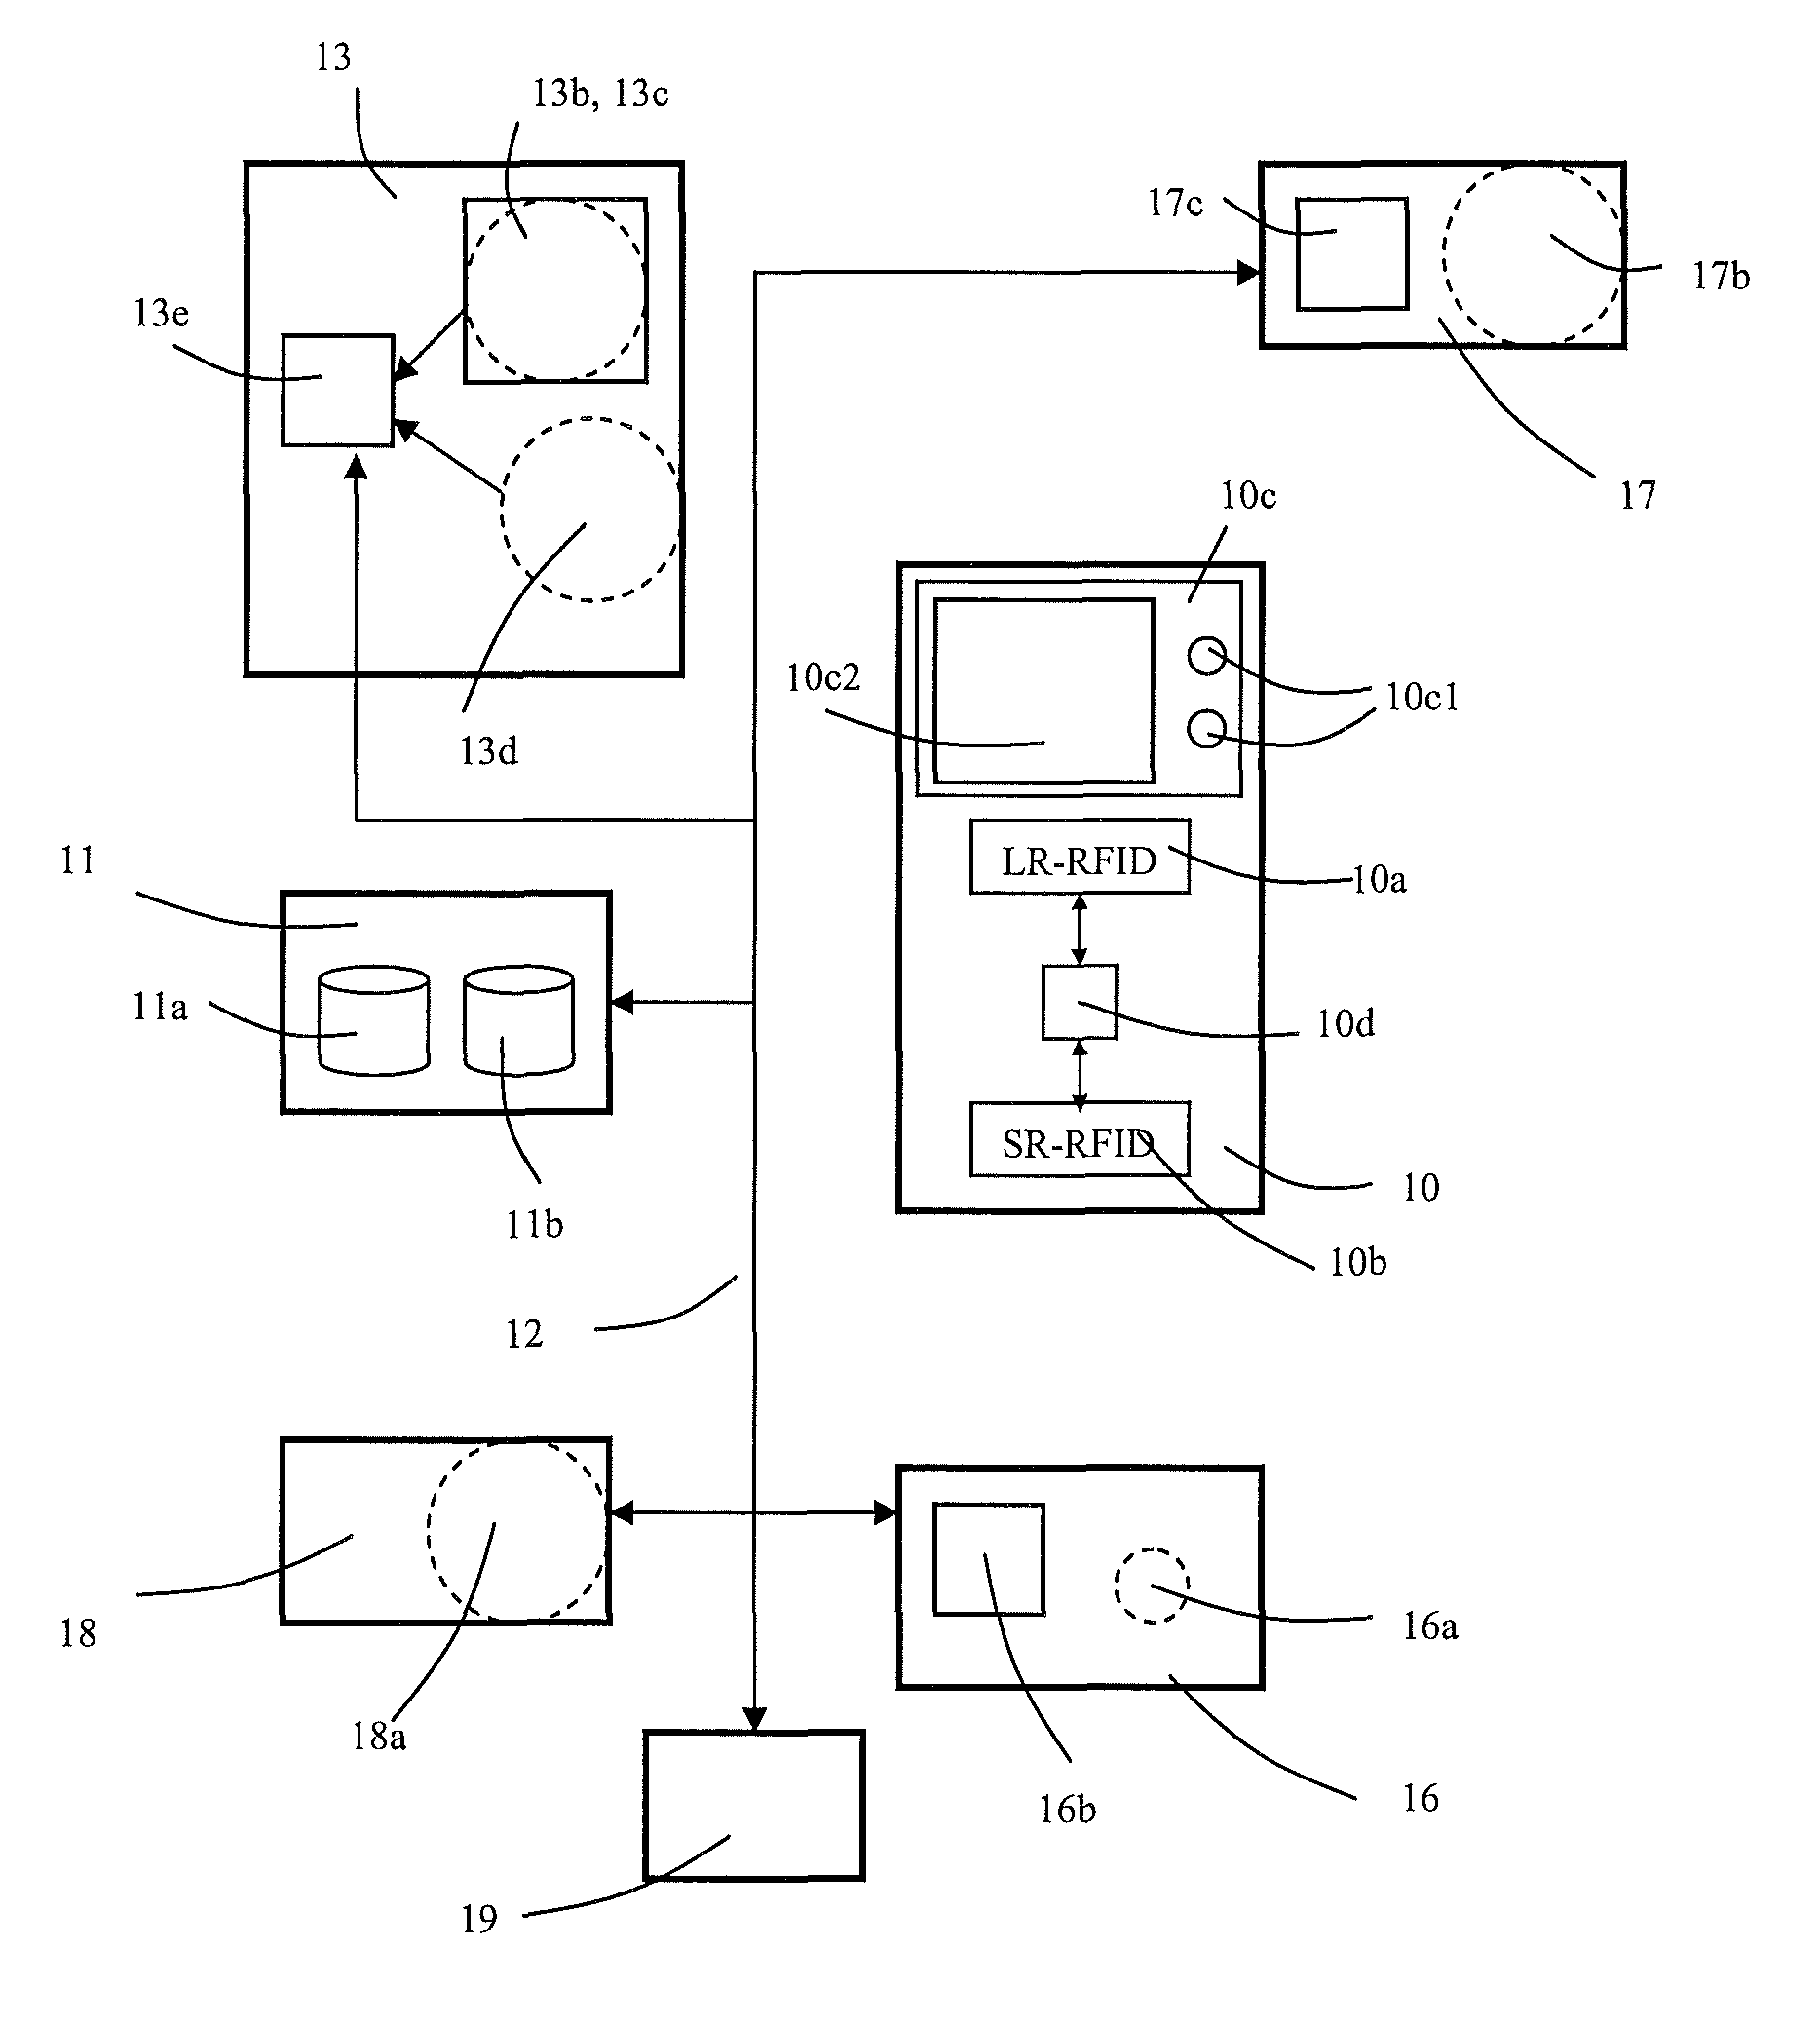 Method and system for limiting access rights within a building